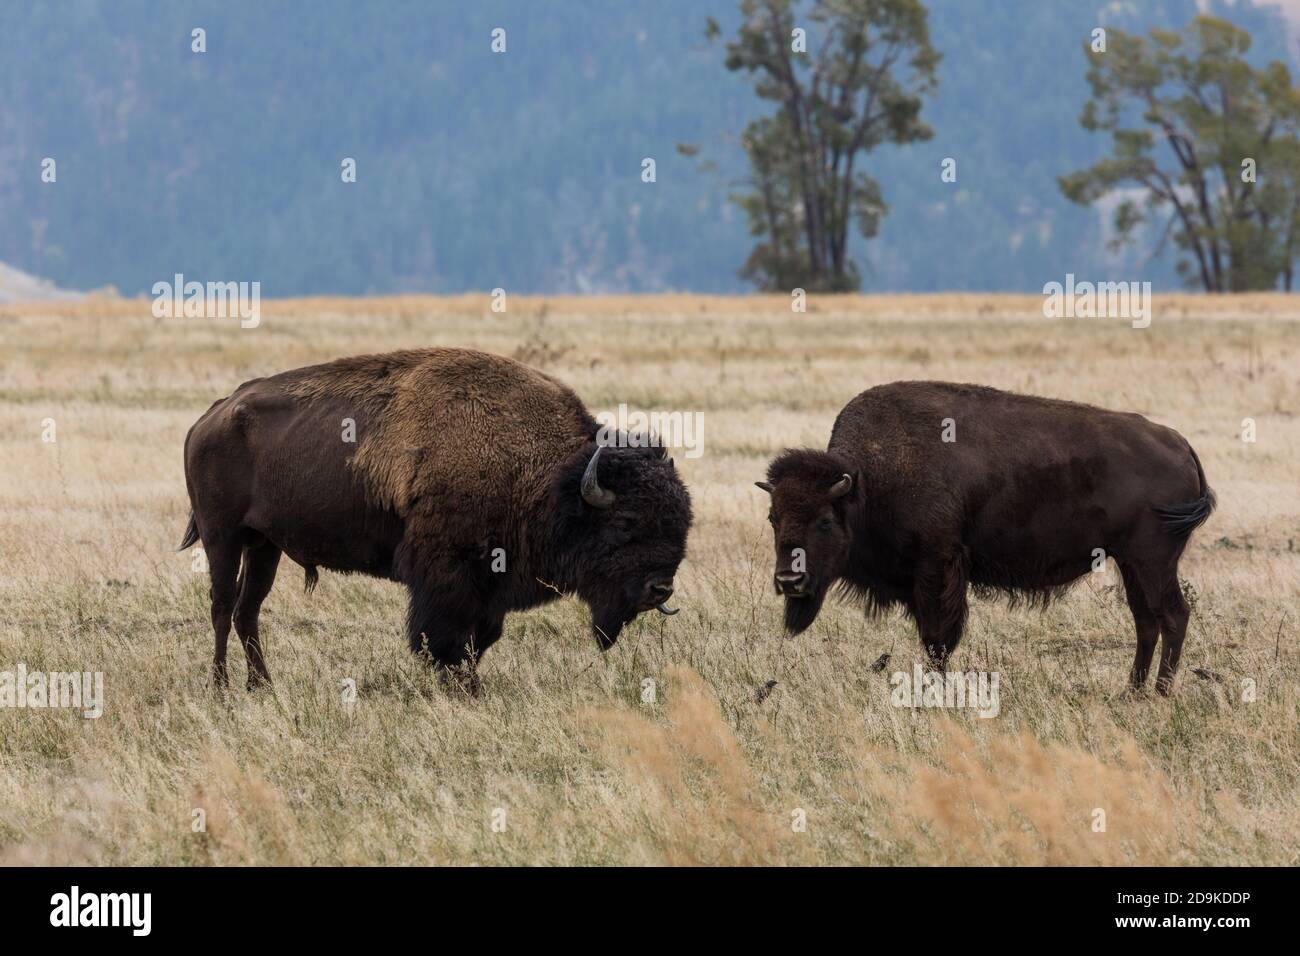 A Plains Bison bull and cow in Grand Teton Natonal Park in Wyoming, USA.  The bull is flicking his tongue out. Stock Photo